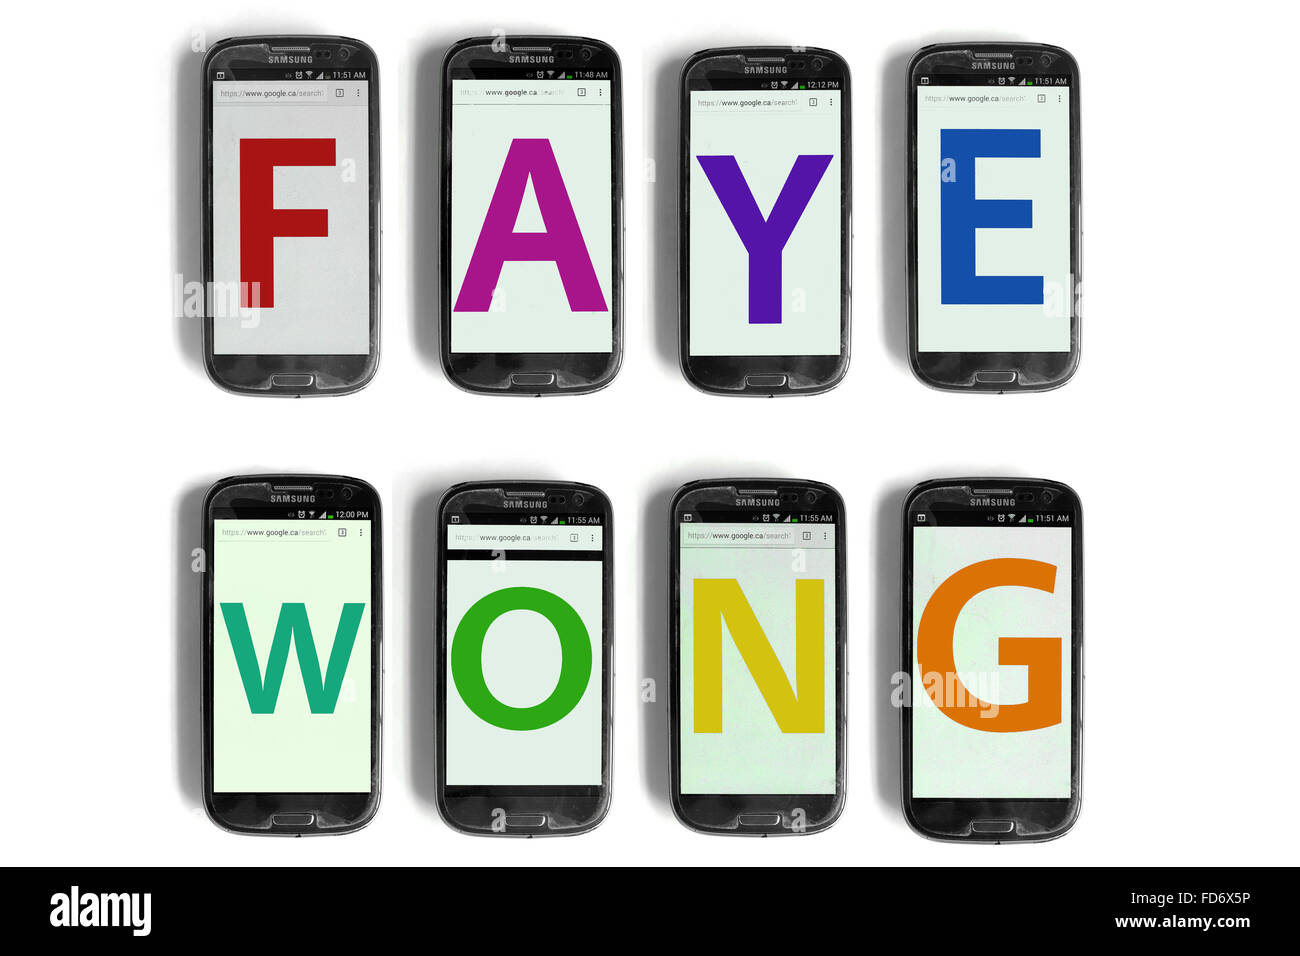 The name of Weibo star Faye Wong spelled out on the screens of smartphones photographed against a white back ground. Stock Photo